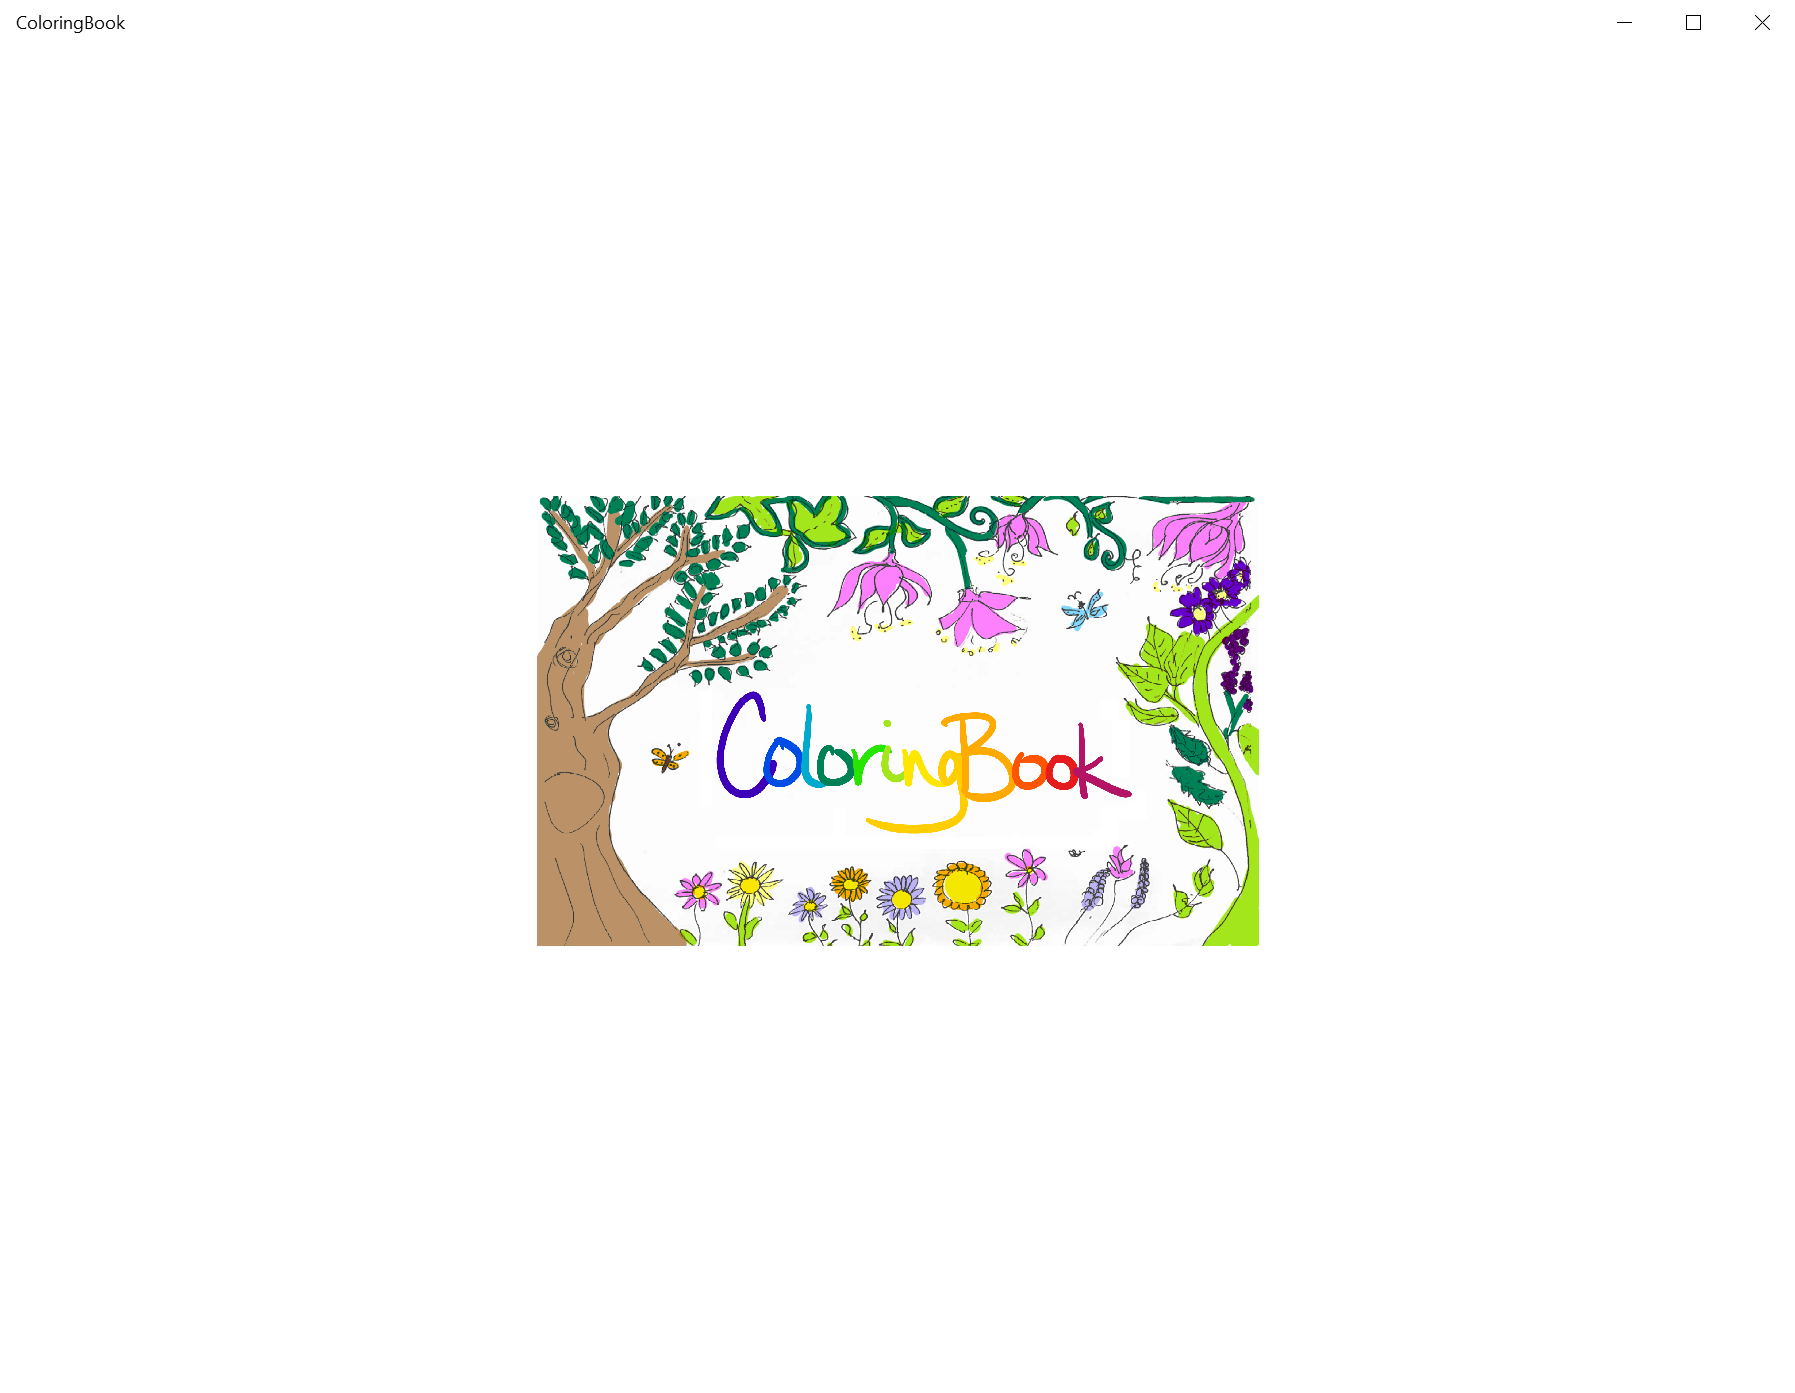 Screenshot of the Windows coloring book loading screen. It displays a fully colored page.